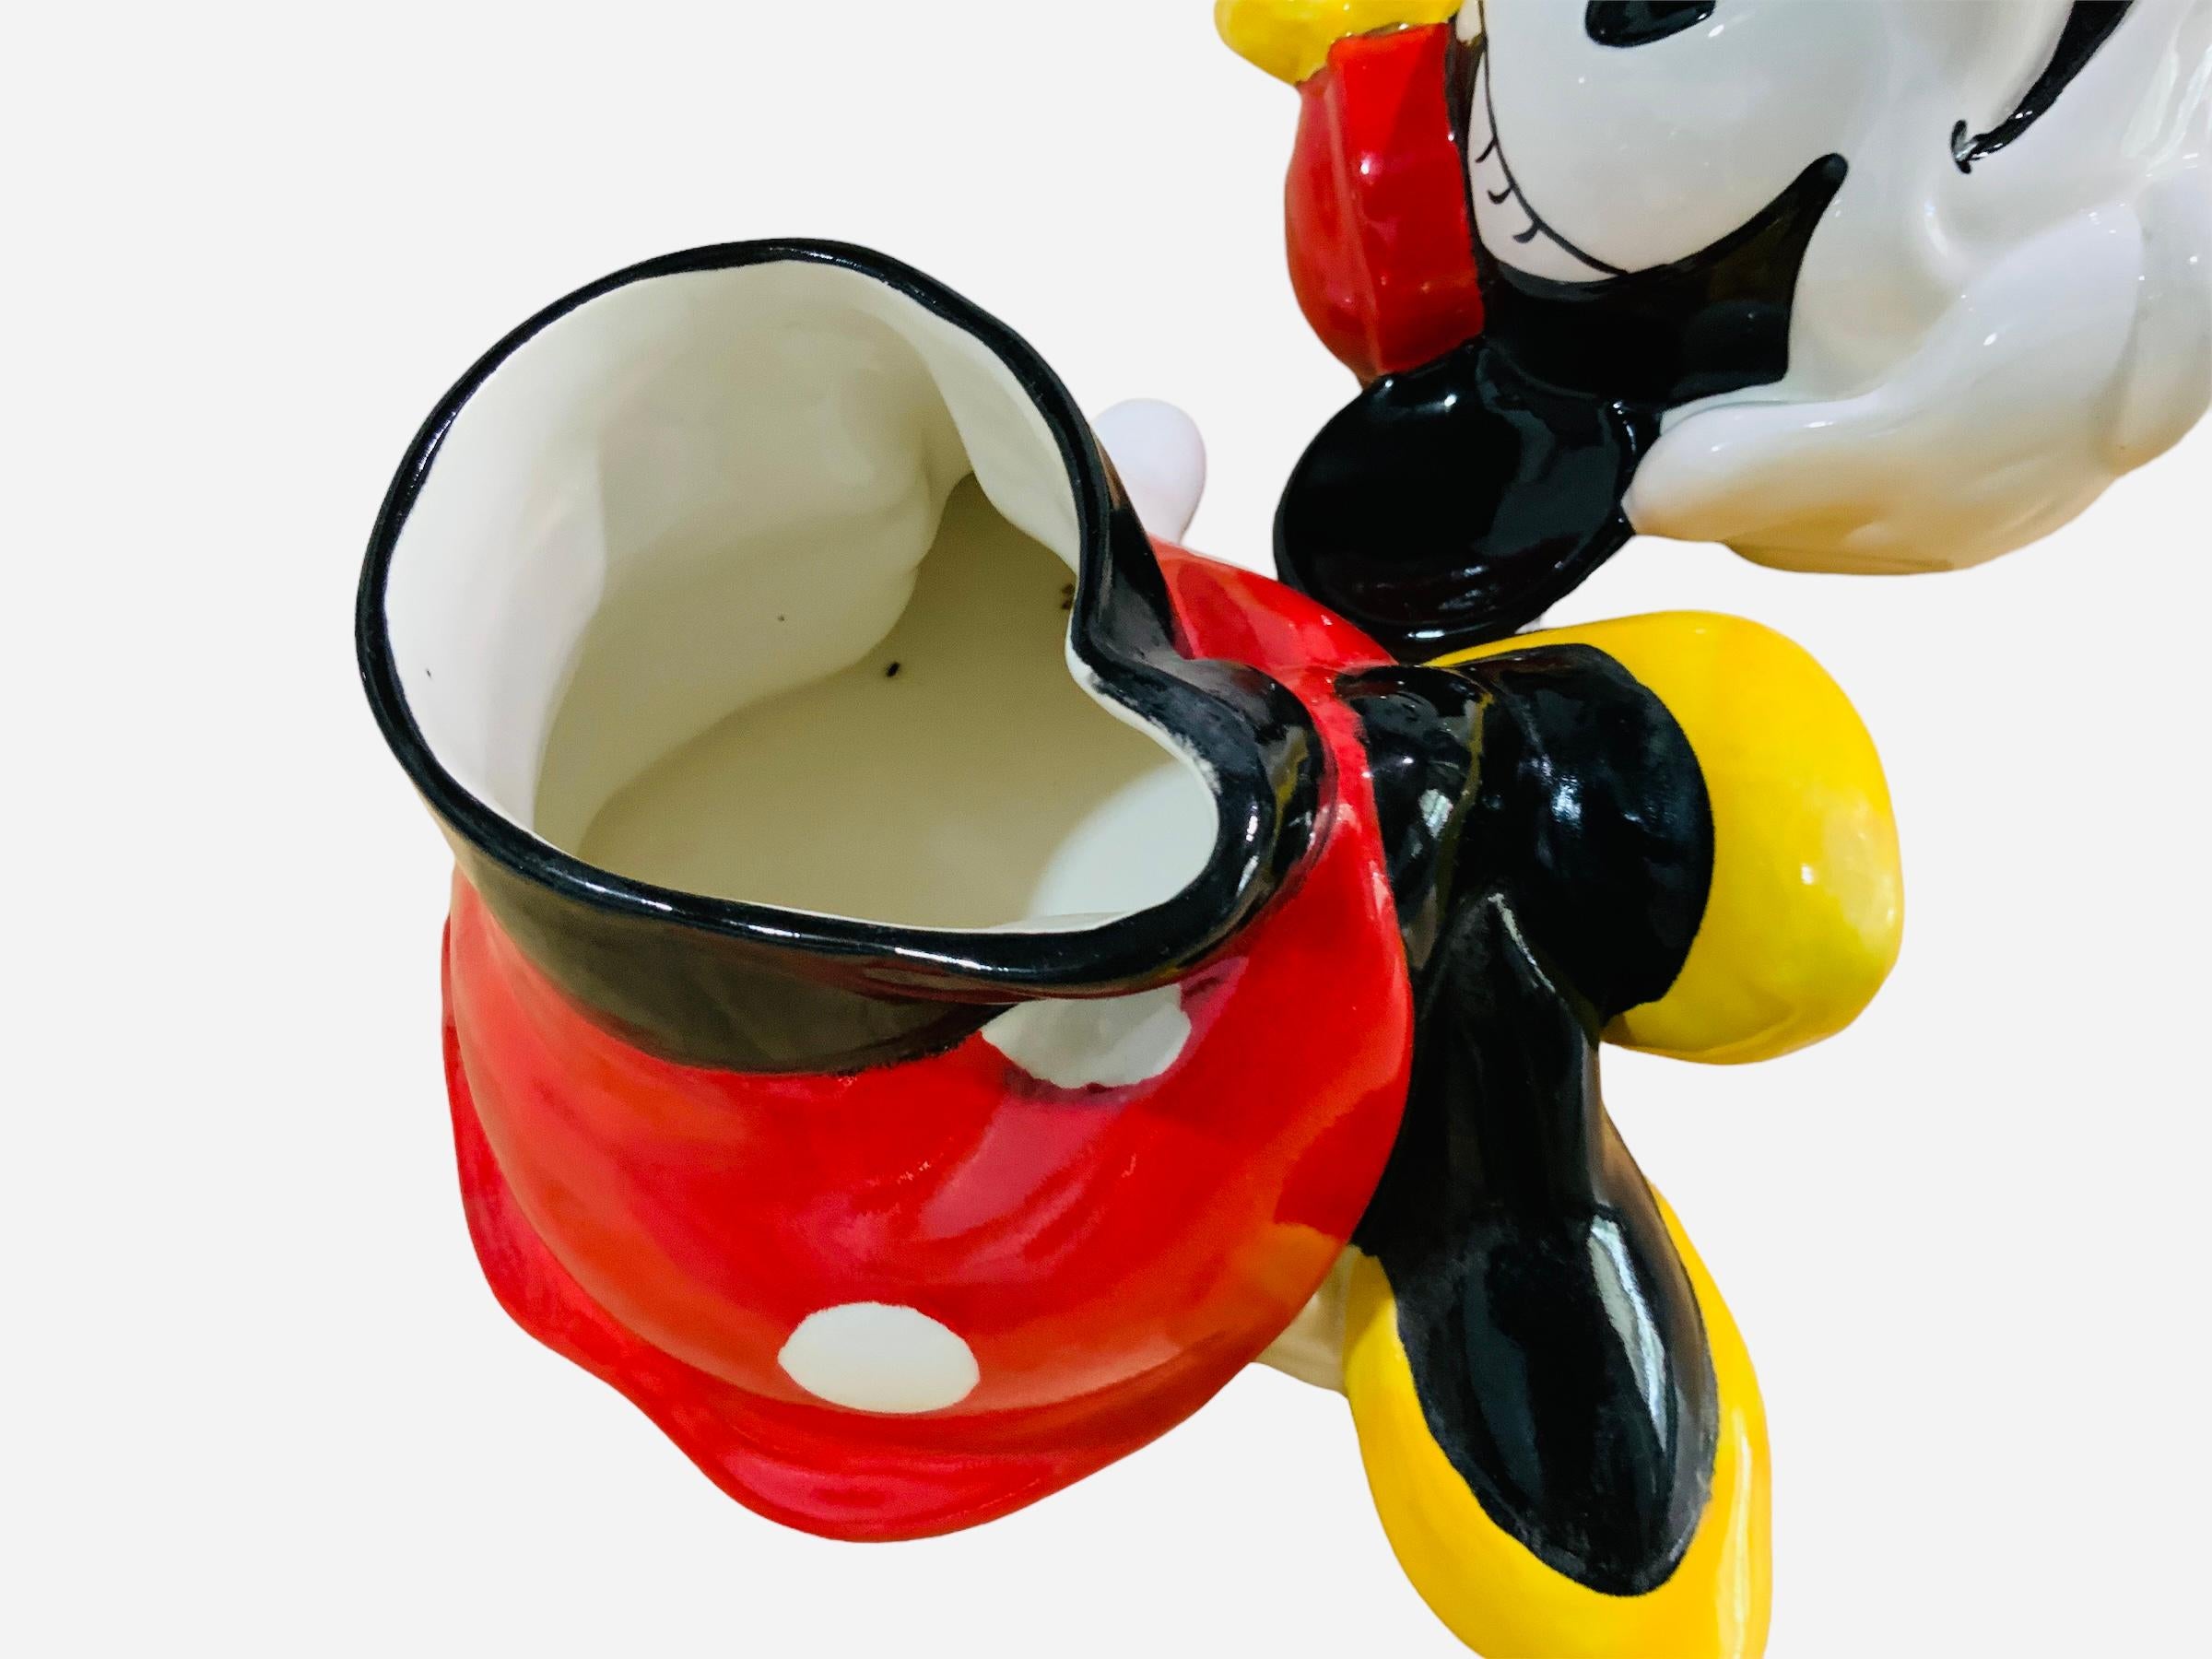 This is a Walt Disney, Minnie Mouse Cookie Jar. It depicts a hand painted glazed ceramic cookie jar shaped as a flirty seated Minnie Mouse. Below the base is hallmarked Mexico. The border of her head lid is hallmarked C, Disney.